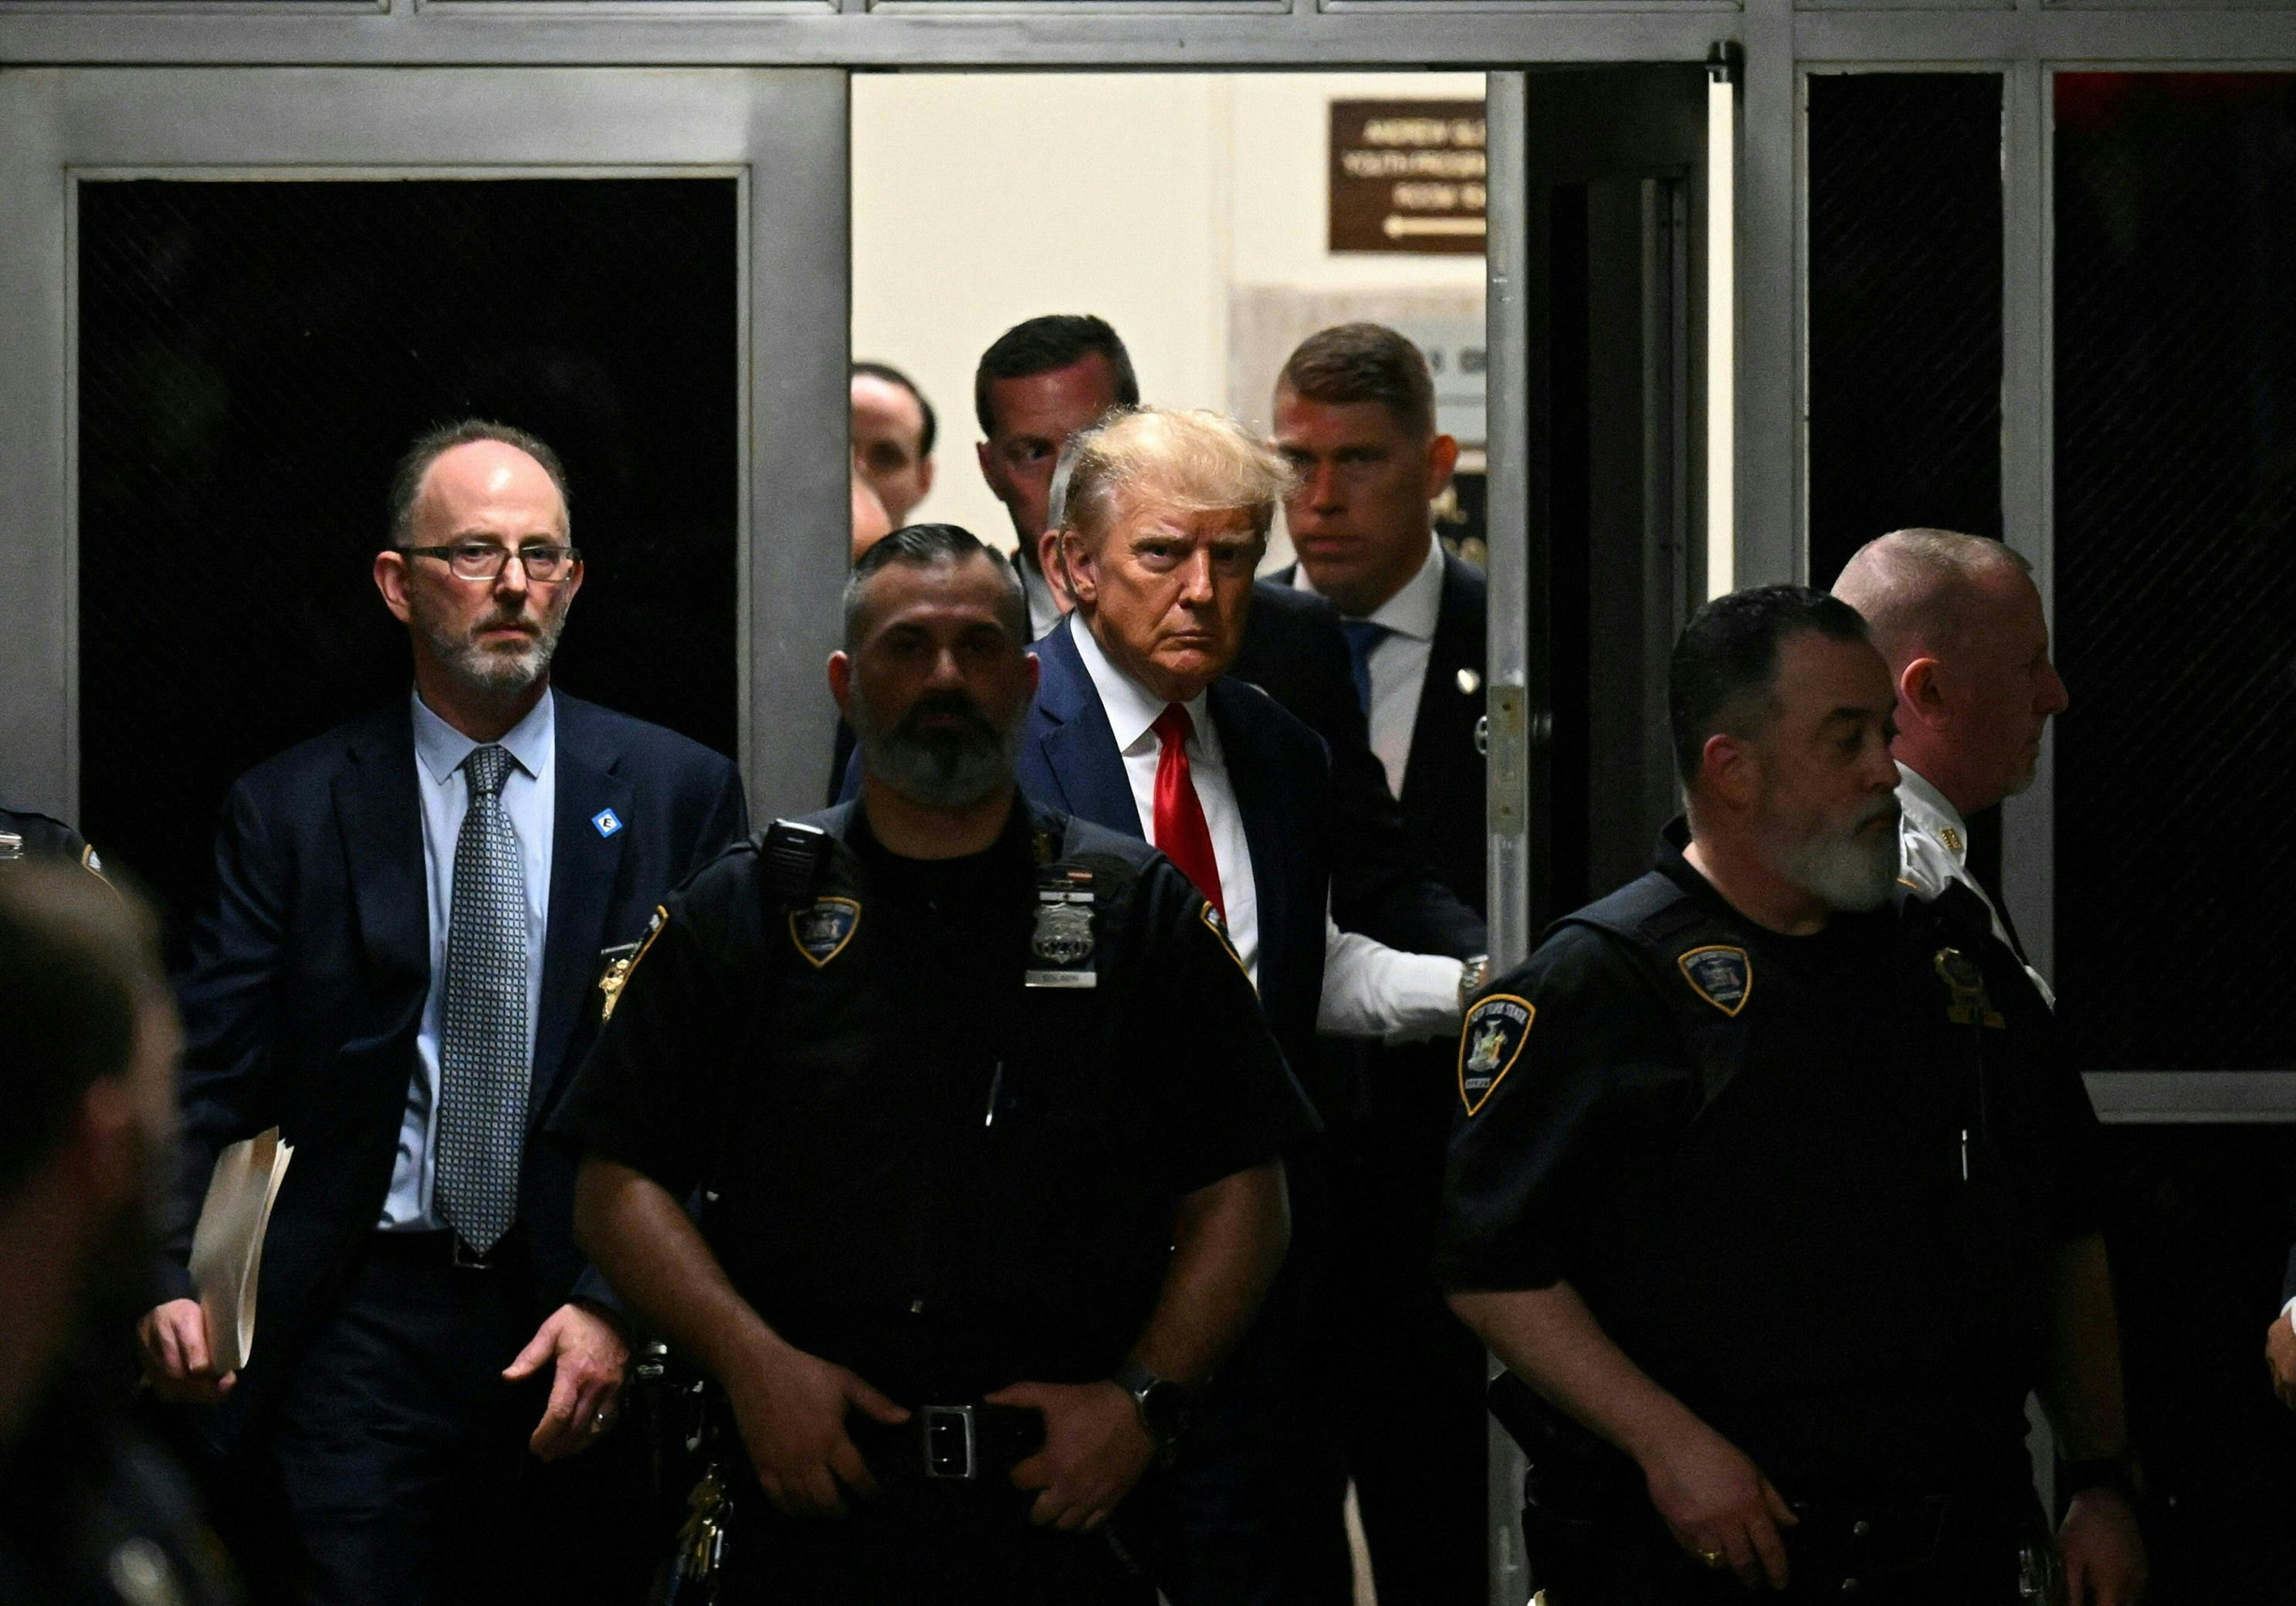 Former US President Donald Trump makes his way inside the Manhattan Criminal Courthouse in New York on April 4.